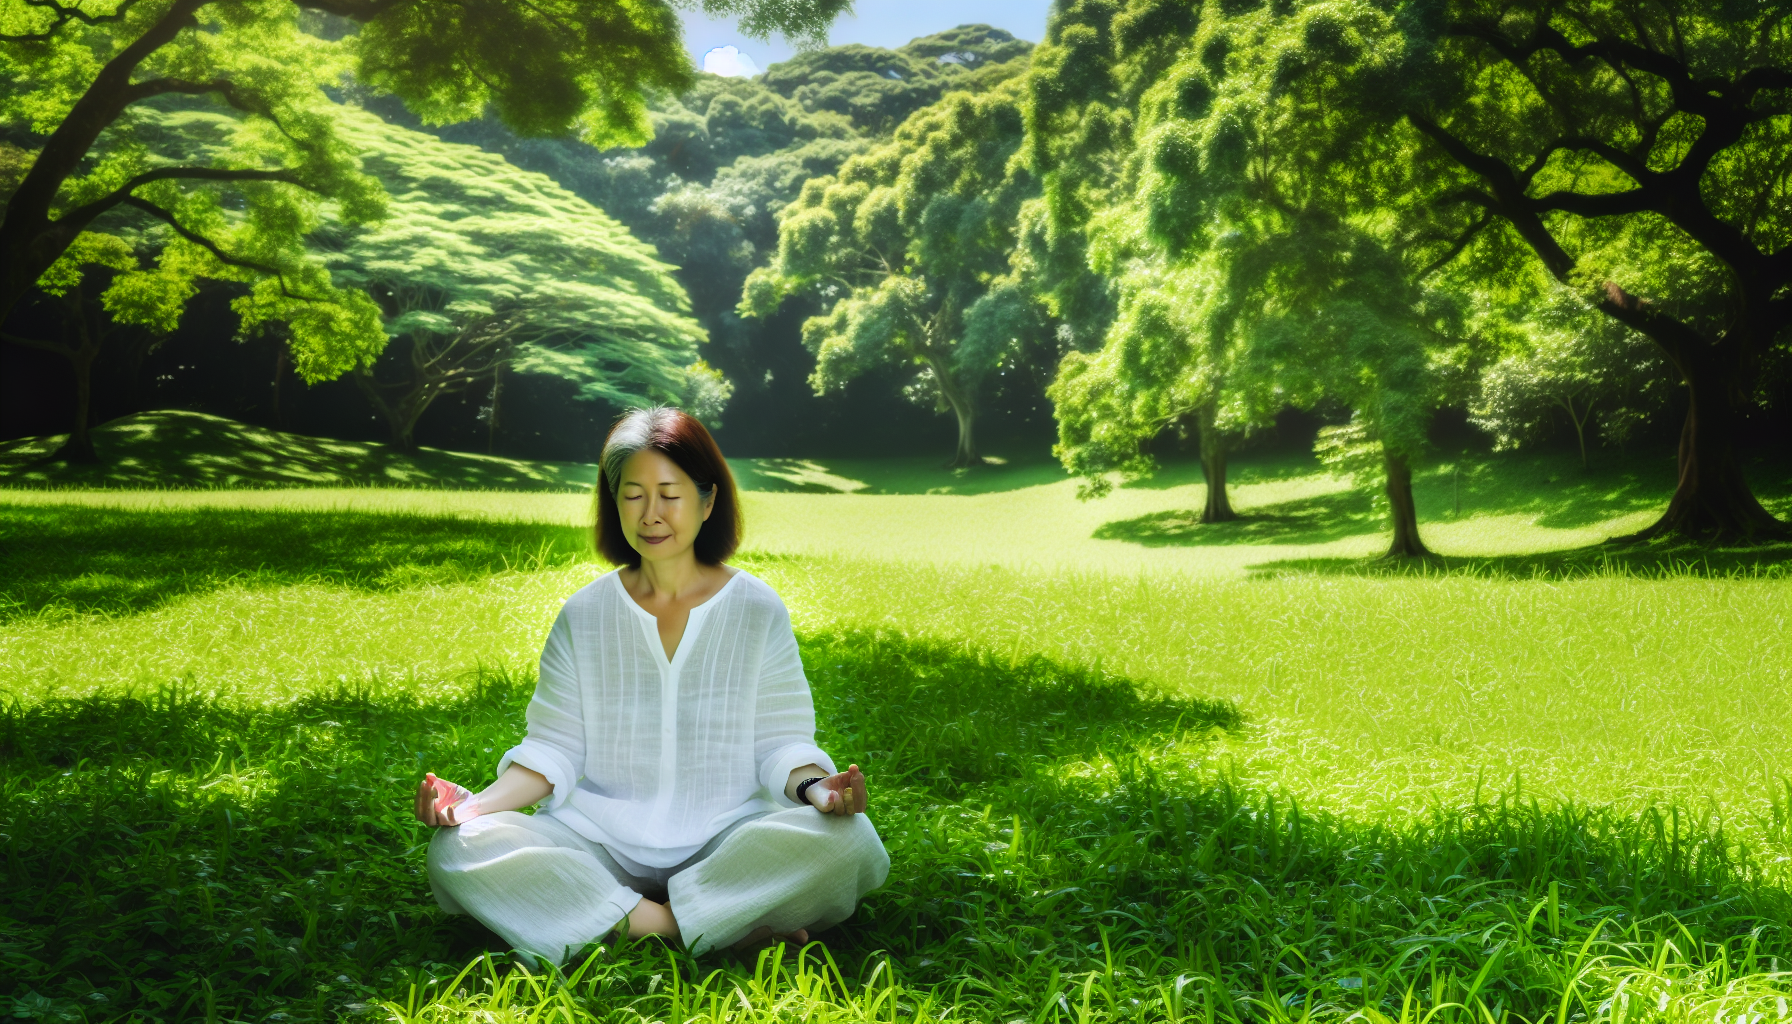 Photo of a person practicing mindfulness in a serene natural setting